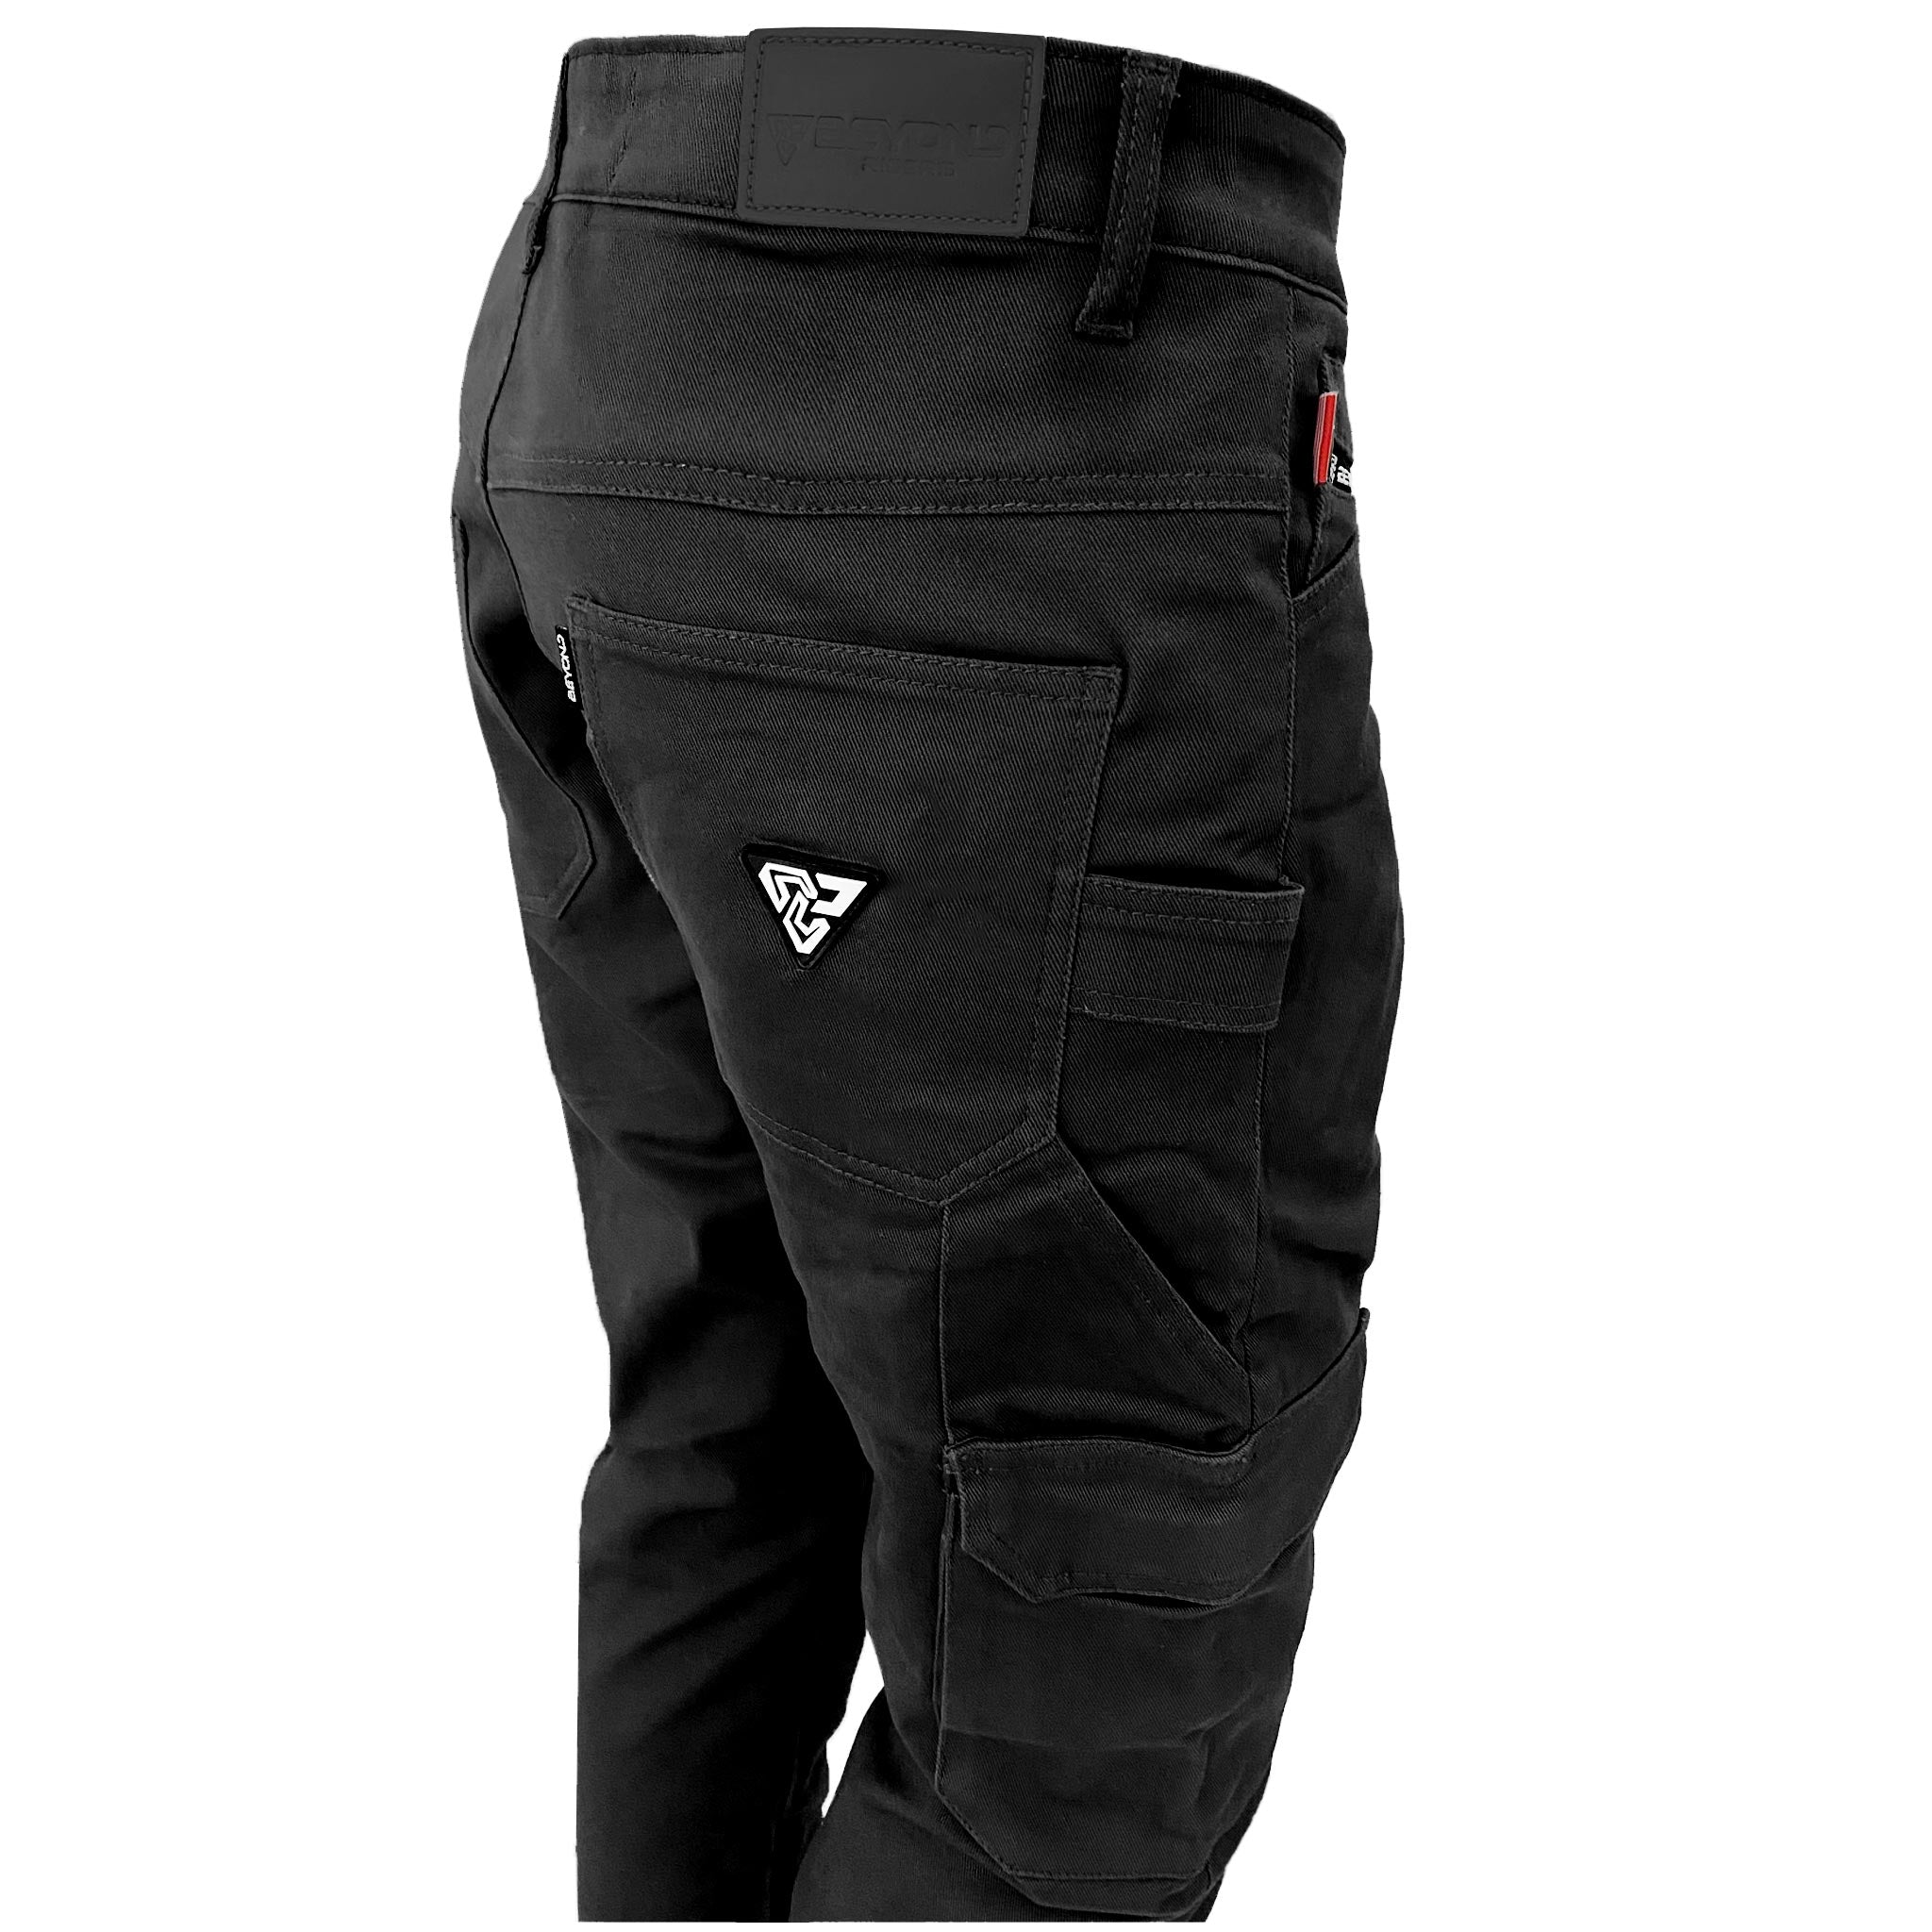 SALE Straight Leg Cargo Pants - Black with Pads